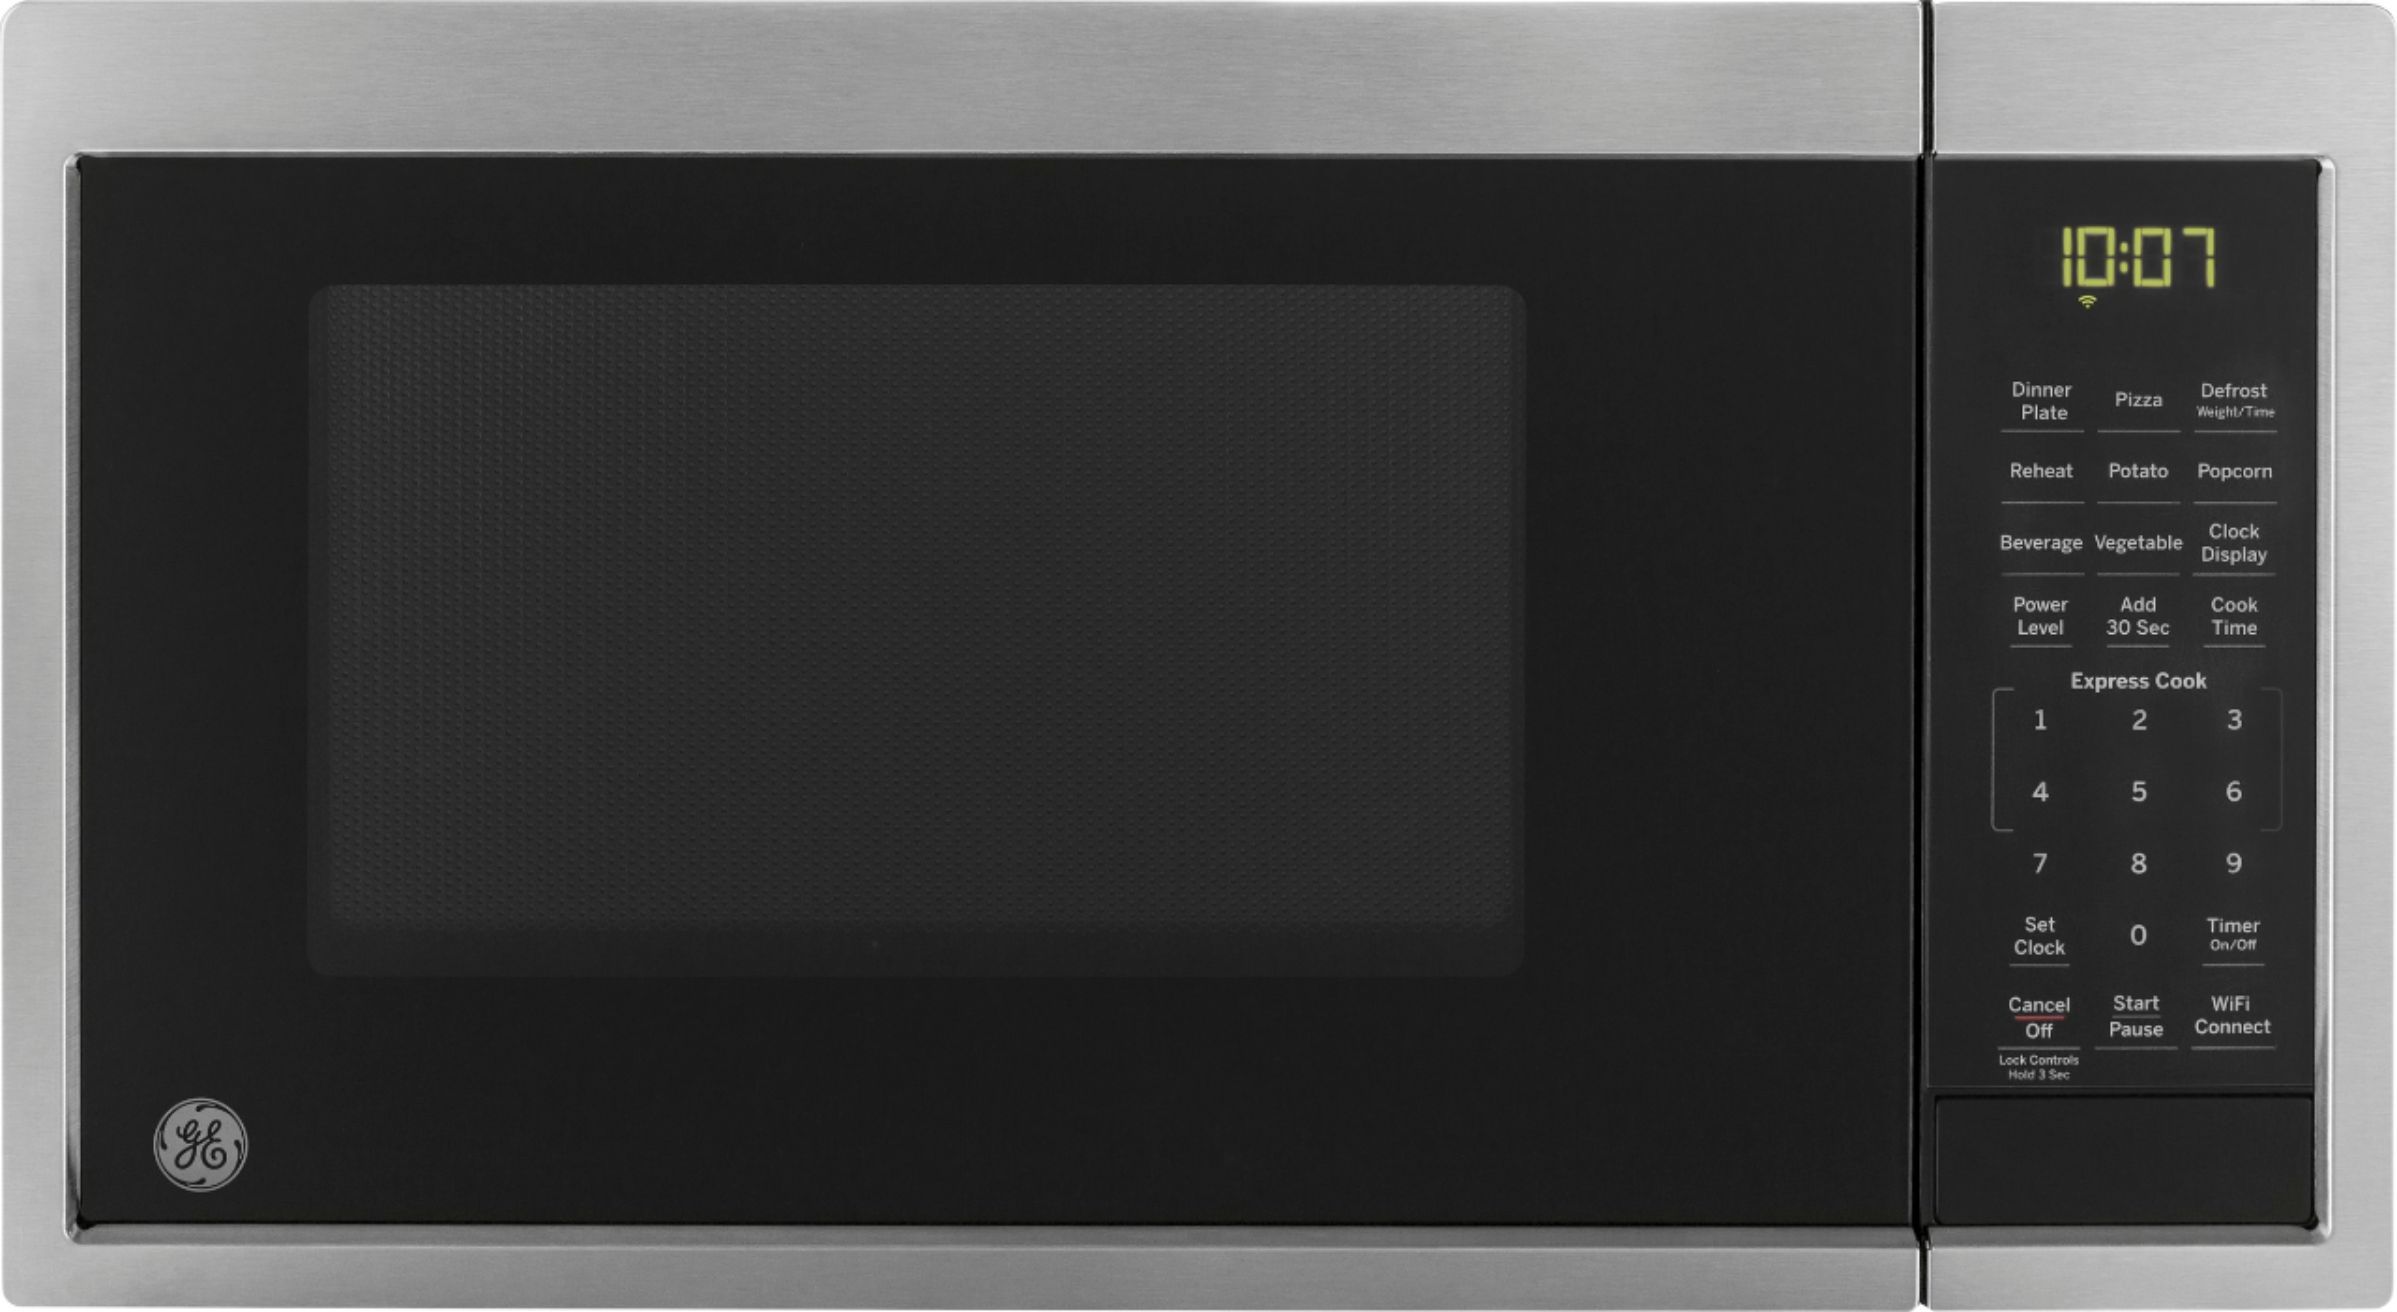 GE 0.9 Cu. Ft. Microwave Stainless Steel – Scan-to-Cook Technology – Amazon Alexa Compatible ... | Best Buy U.S.